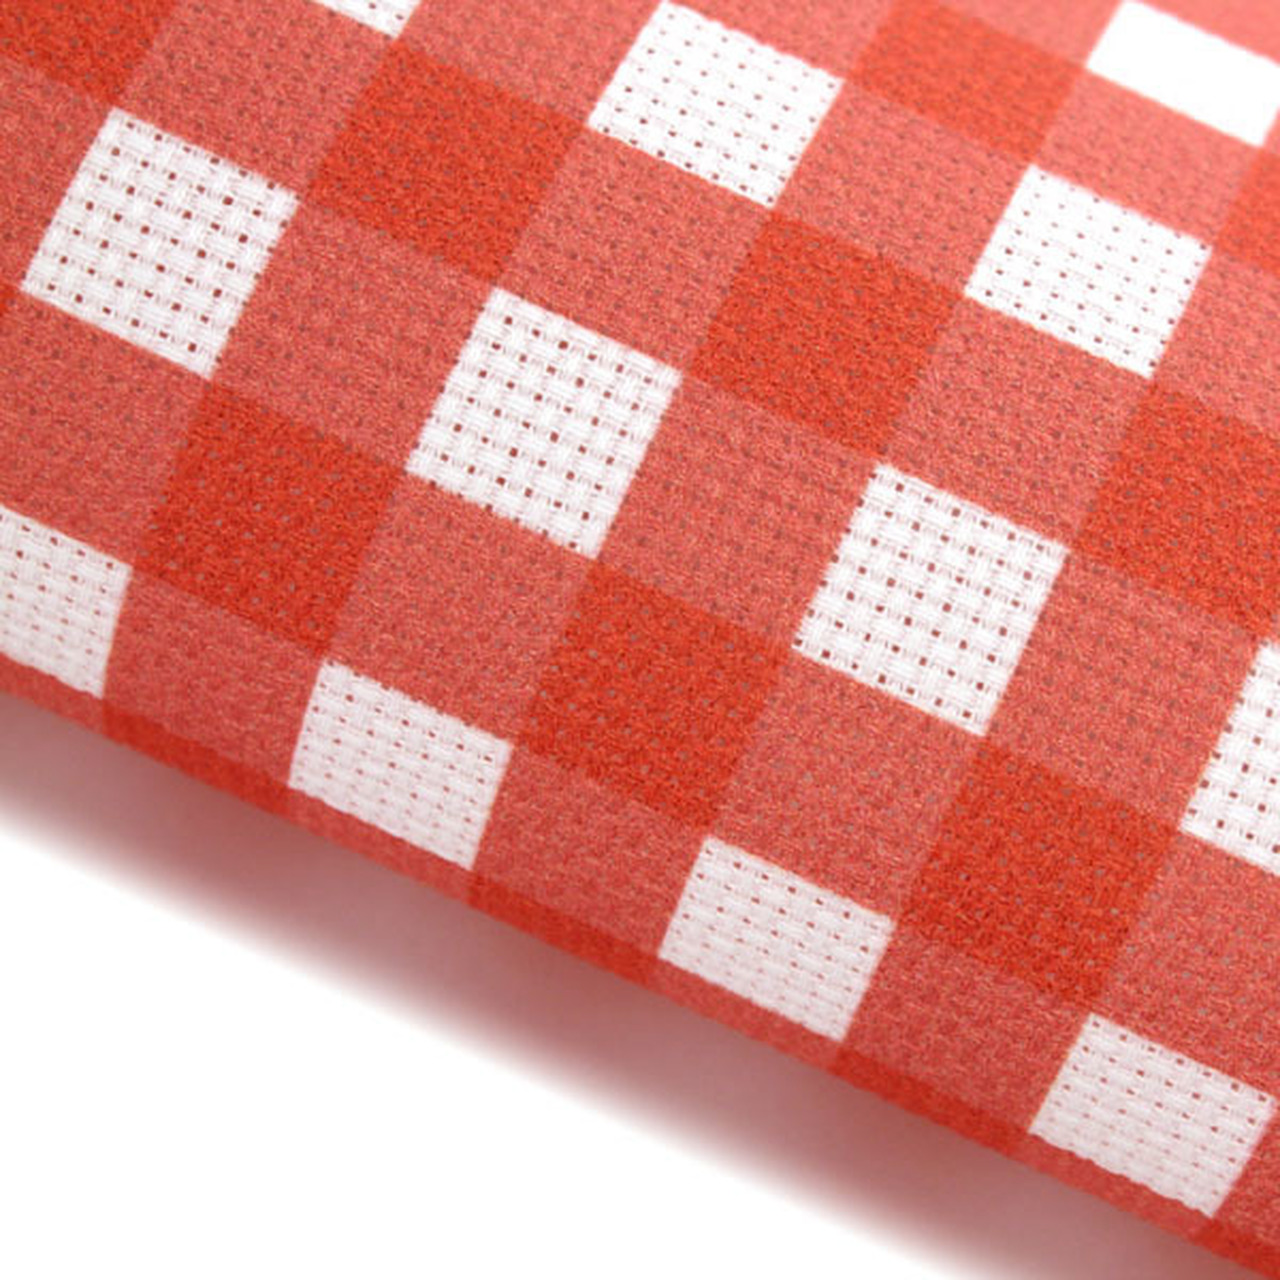 Red Gingham Patterned Cross Stitch Fabric